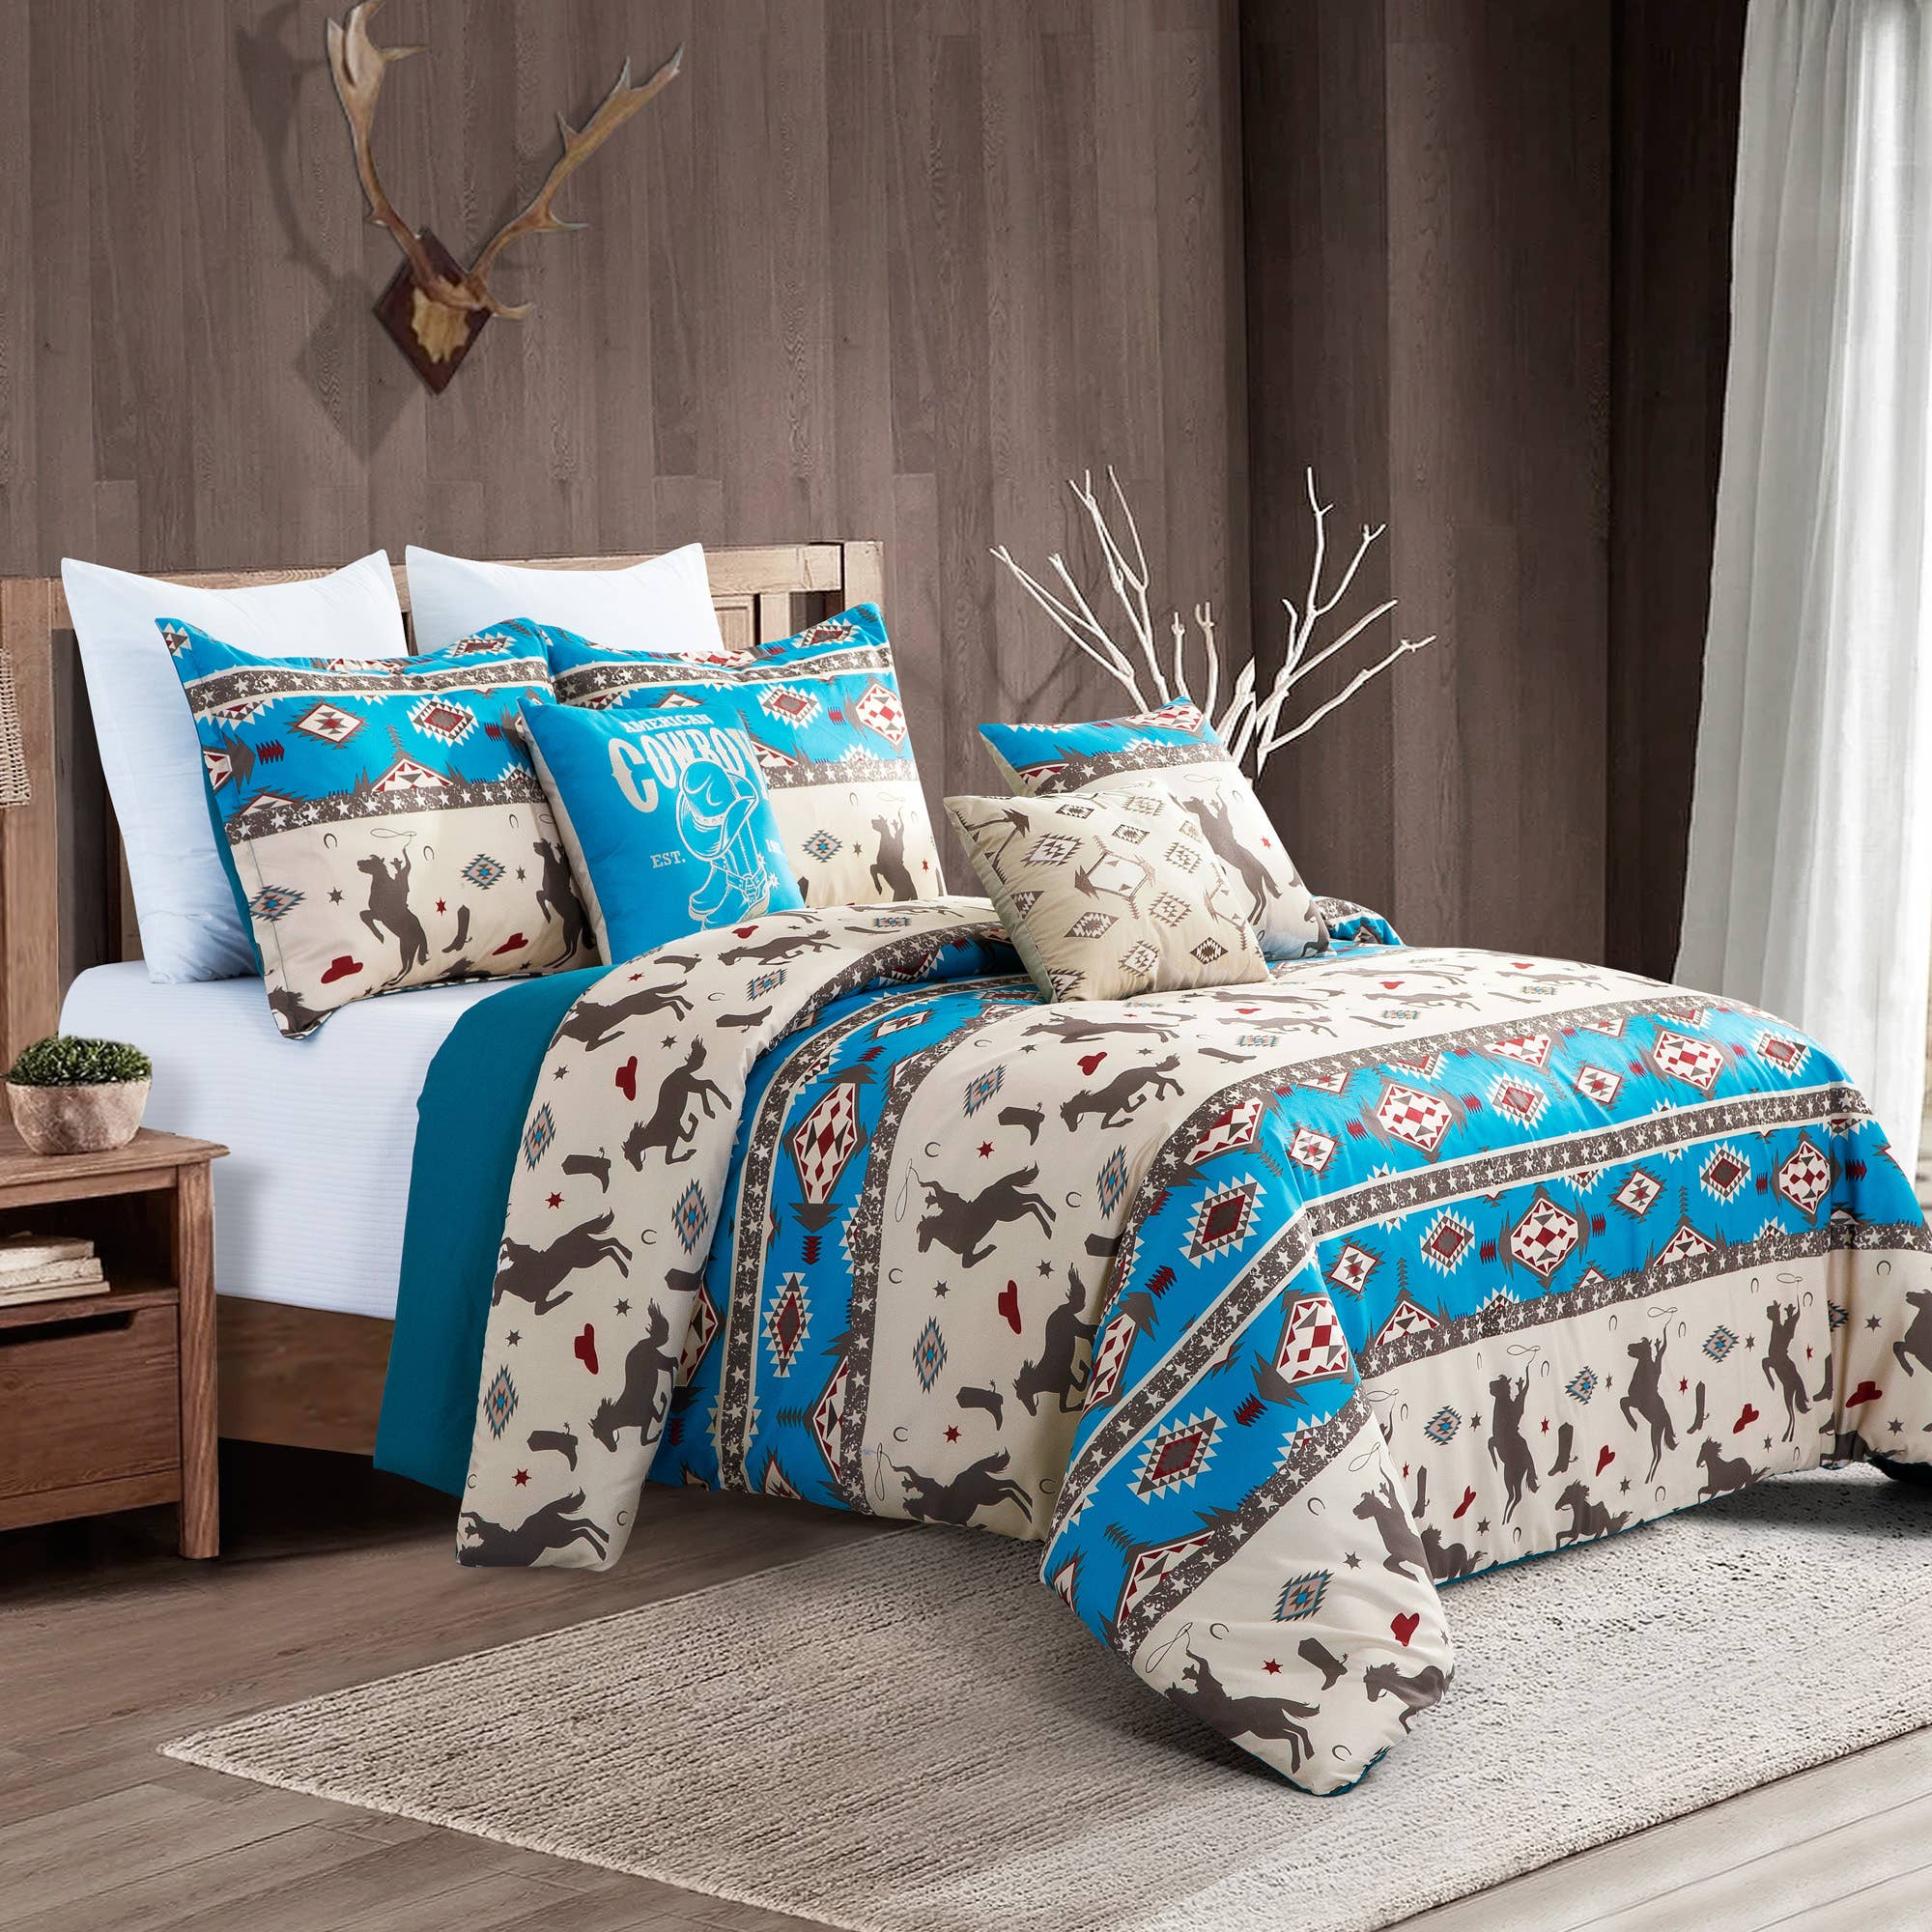 Brand of Bliss Turquoise Cowboy  6pc Comforter Set(PICK UP ONLY)